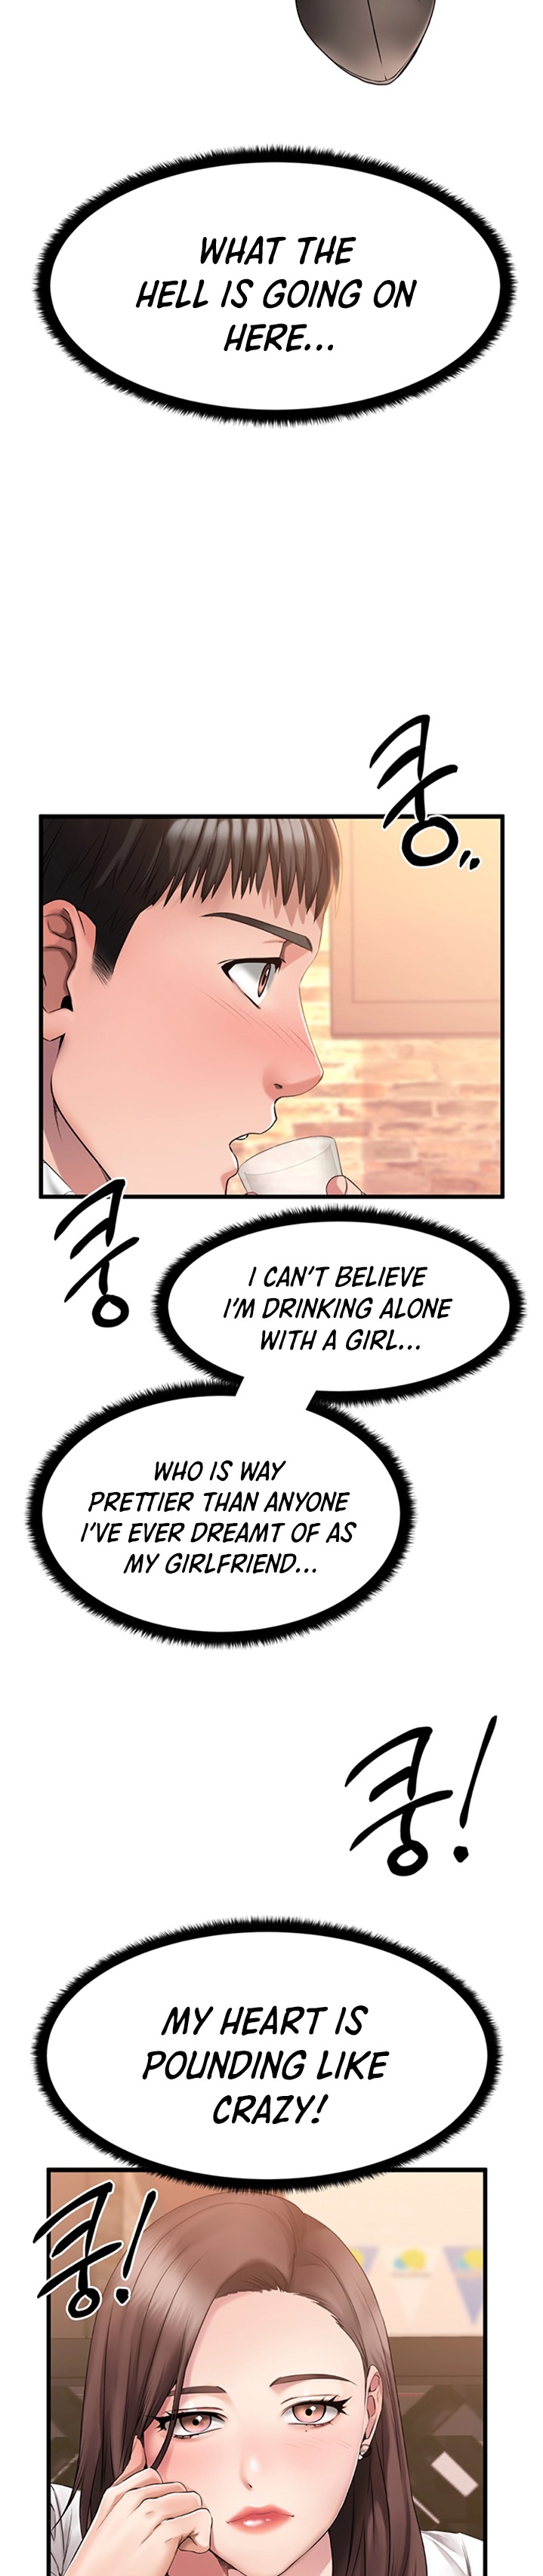 My Female Friend Who Crossed The Line - Chapter 1 Page 16